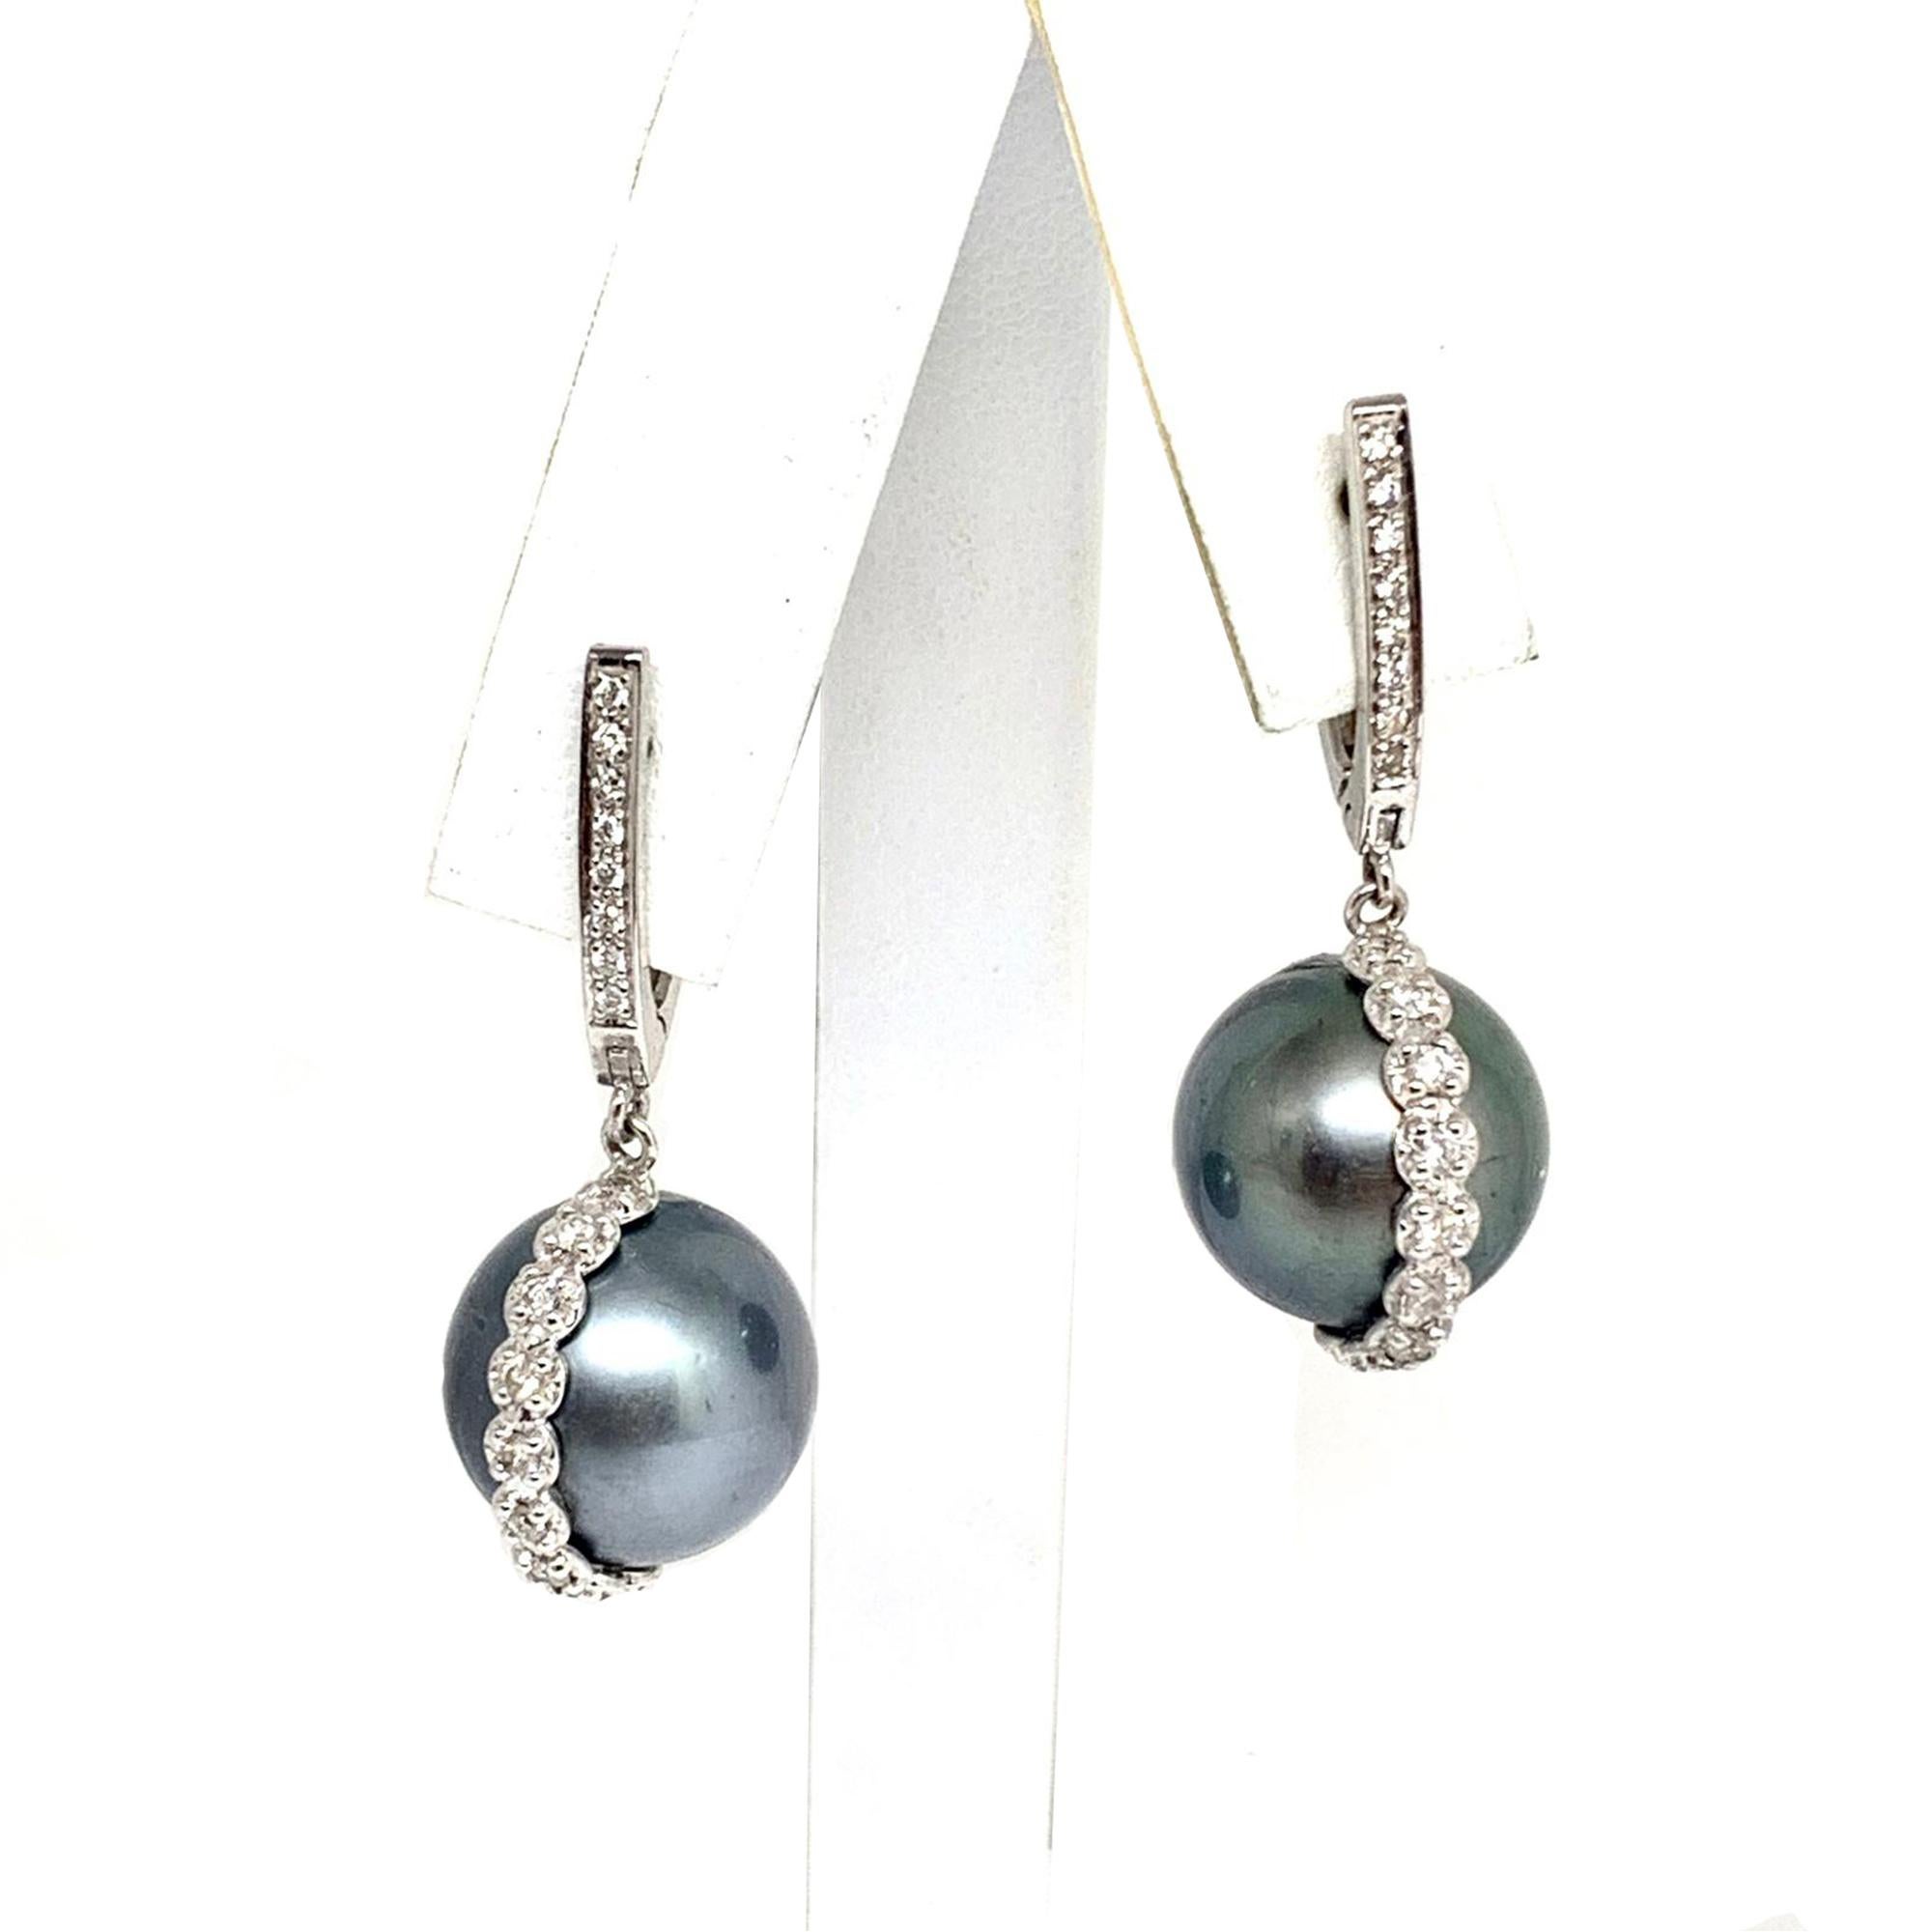 Certificate#201915538 WG

Certified Authentic Tahitian Saltwater Pearl Large 14.05-13.90 MM appx and Diamond 14KT White Gold Earrings with a total weight of 11.33 Grams 

This is a One of a Kind Unique Custom Made Glamorous Piece of